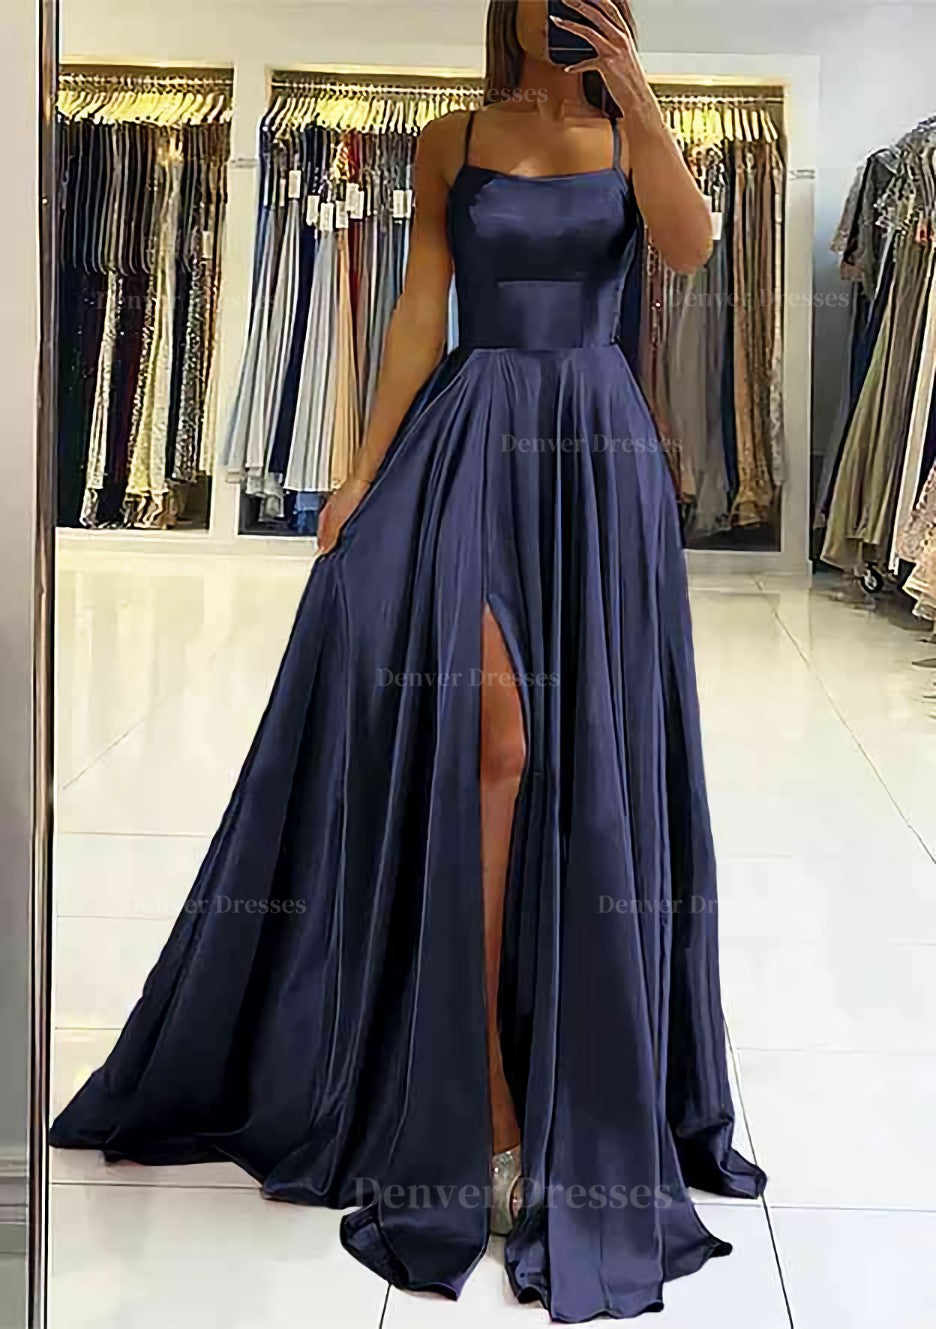 Formal Dresses For Weddings Near Me, A-line Square Neckline Sleeveless Satin Sweep Train Prom Dress With Pleated